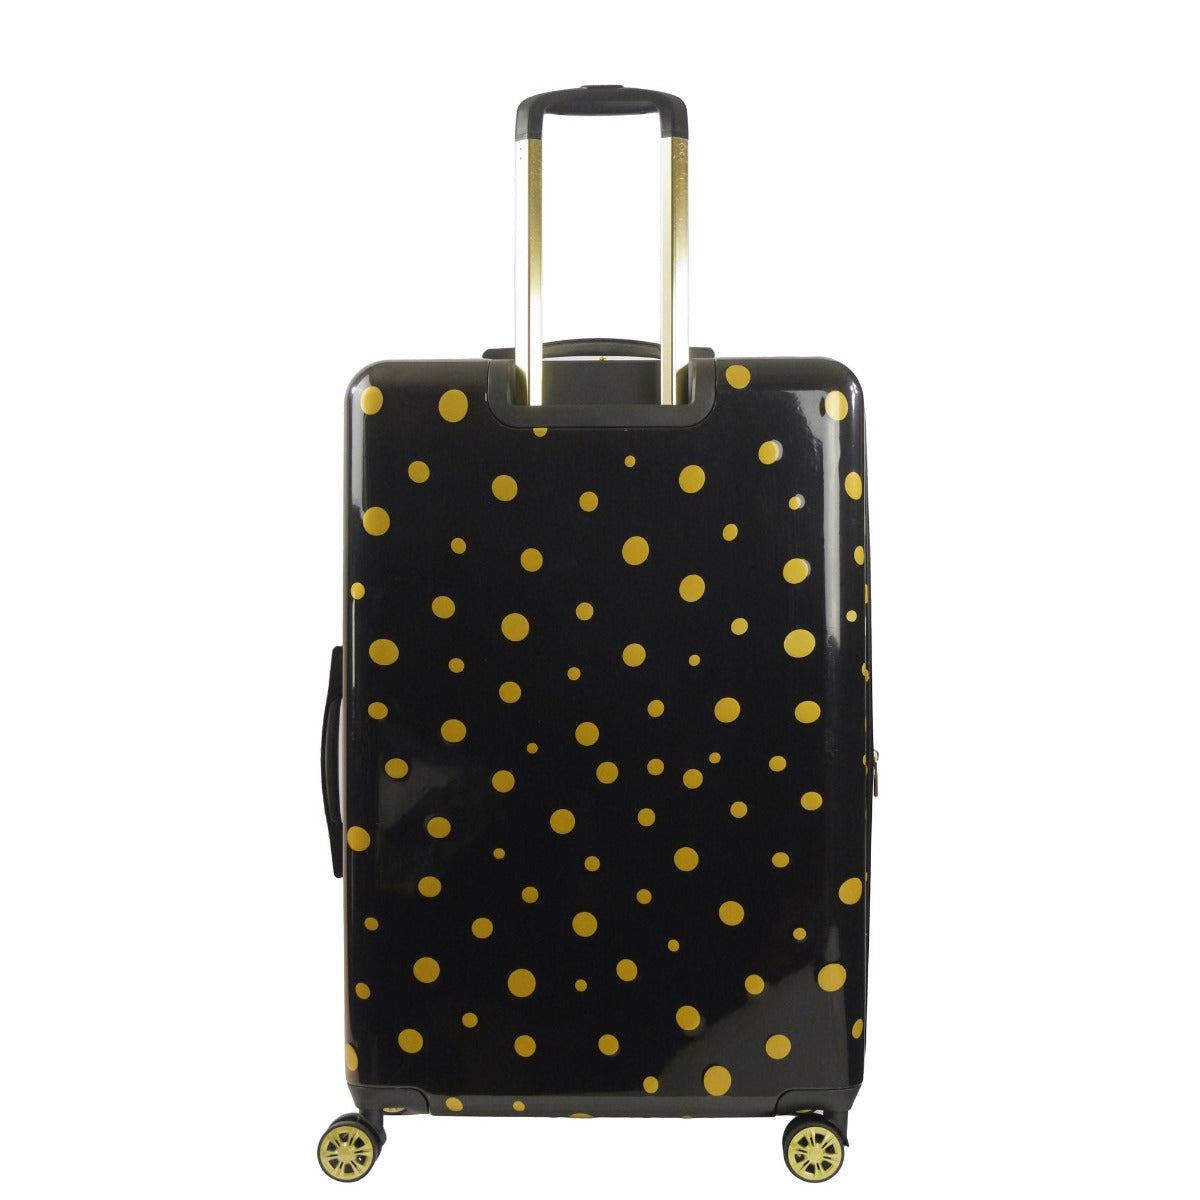 Ful Impulse Mixed Dots Hardside Spinner 31 Inch Checked Luggage Black Gold Suitcase